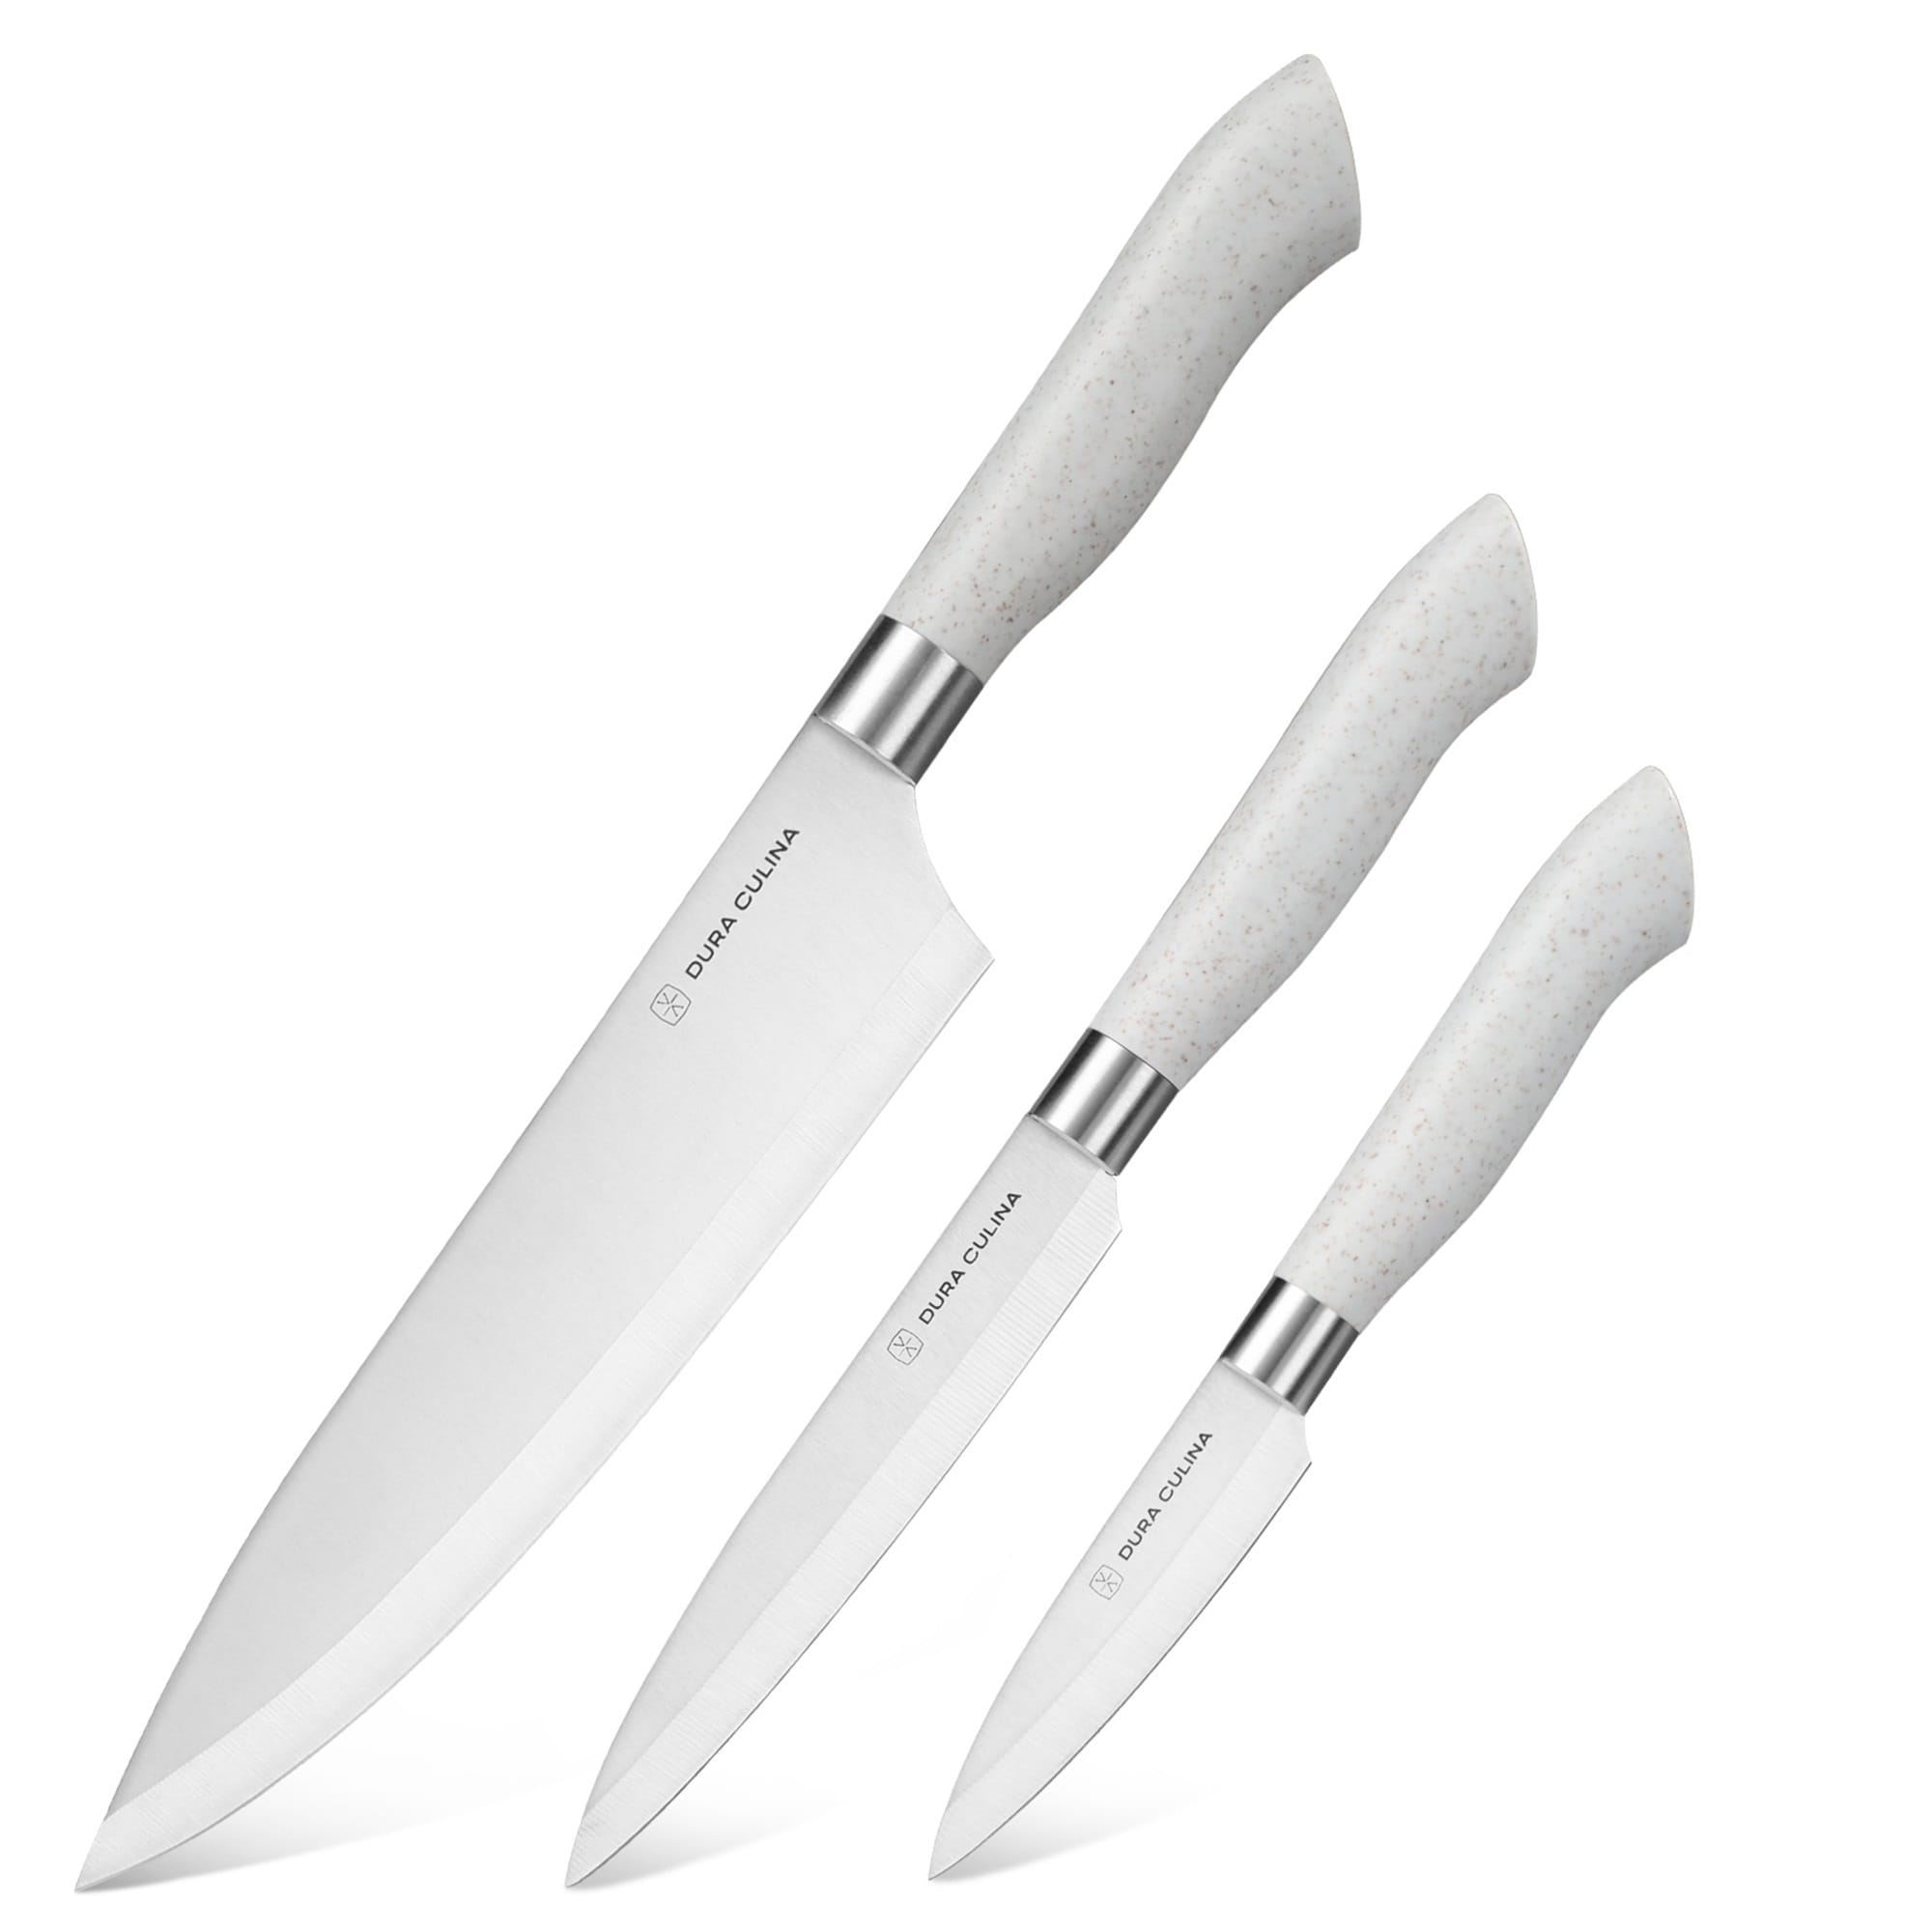 https://ak1.ostkcdn.com/images/products/is/images/direct/e6d50d3f28d2c66ec6cc2add67021bba8cea9123/DURA-LIVING-EcoCut-3-Piece-Kitchen-Knife-Set---High-Carbon-Stainless-Steel-Blades%2C-Sustainable-Eco-Friendly-Handles%2C-W--Sheaths.jpg